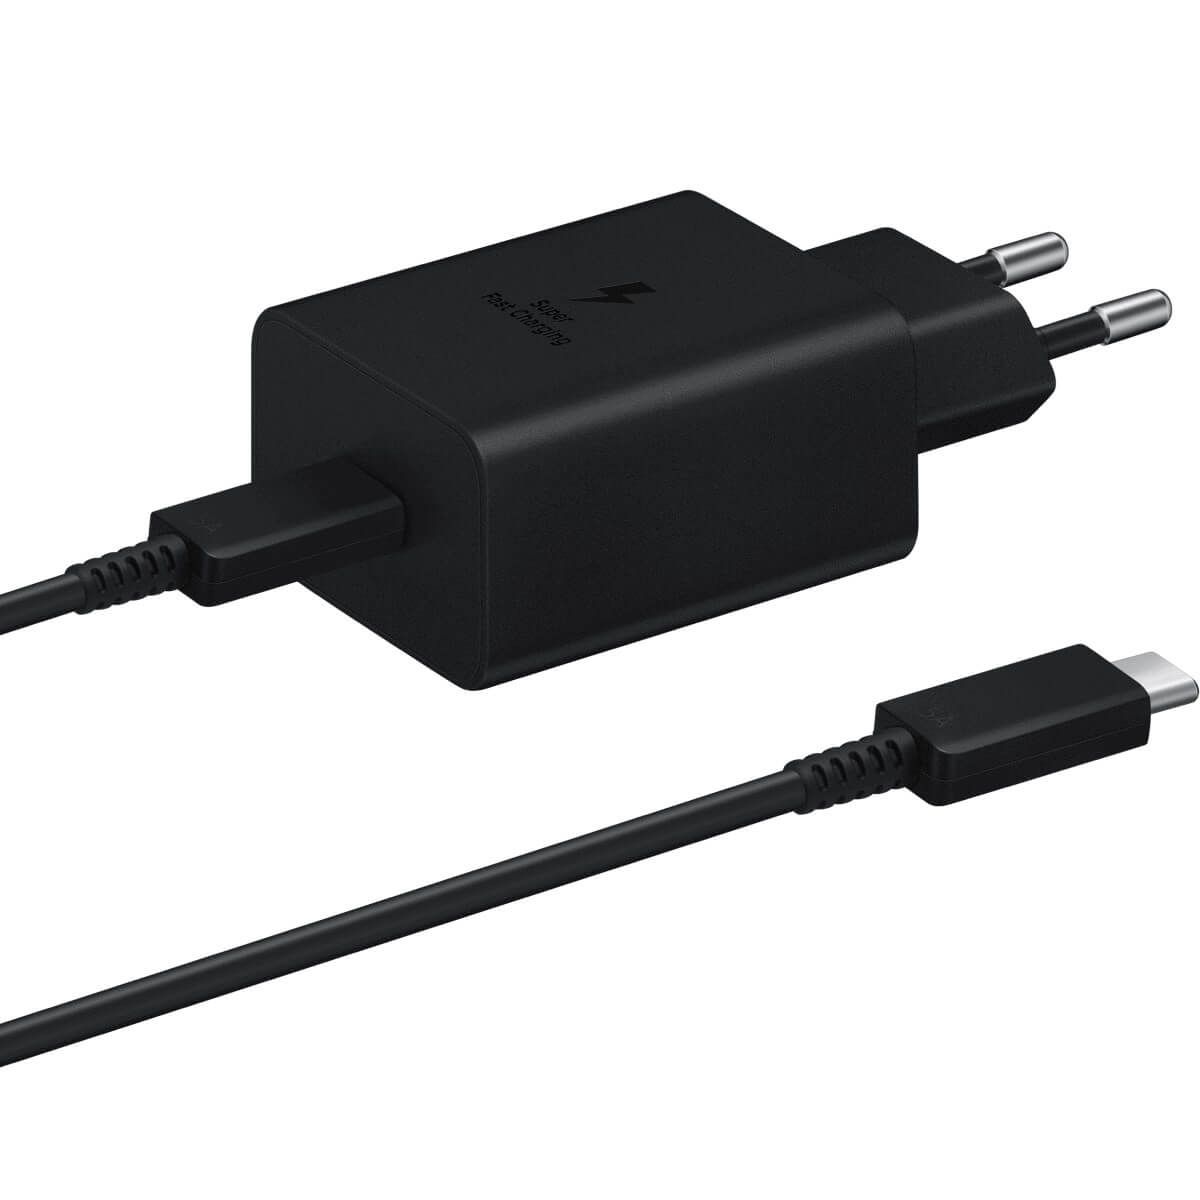 Samsung USB-C thuislader met C to C cable 1.8m - zwart - power delivery 45W